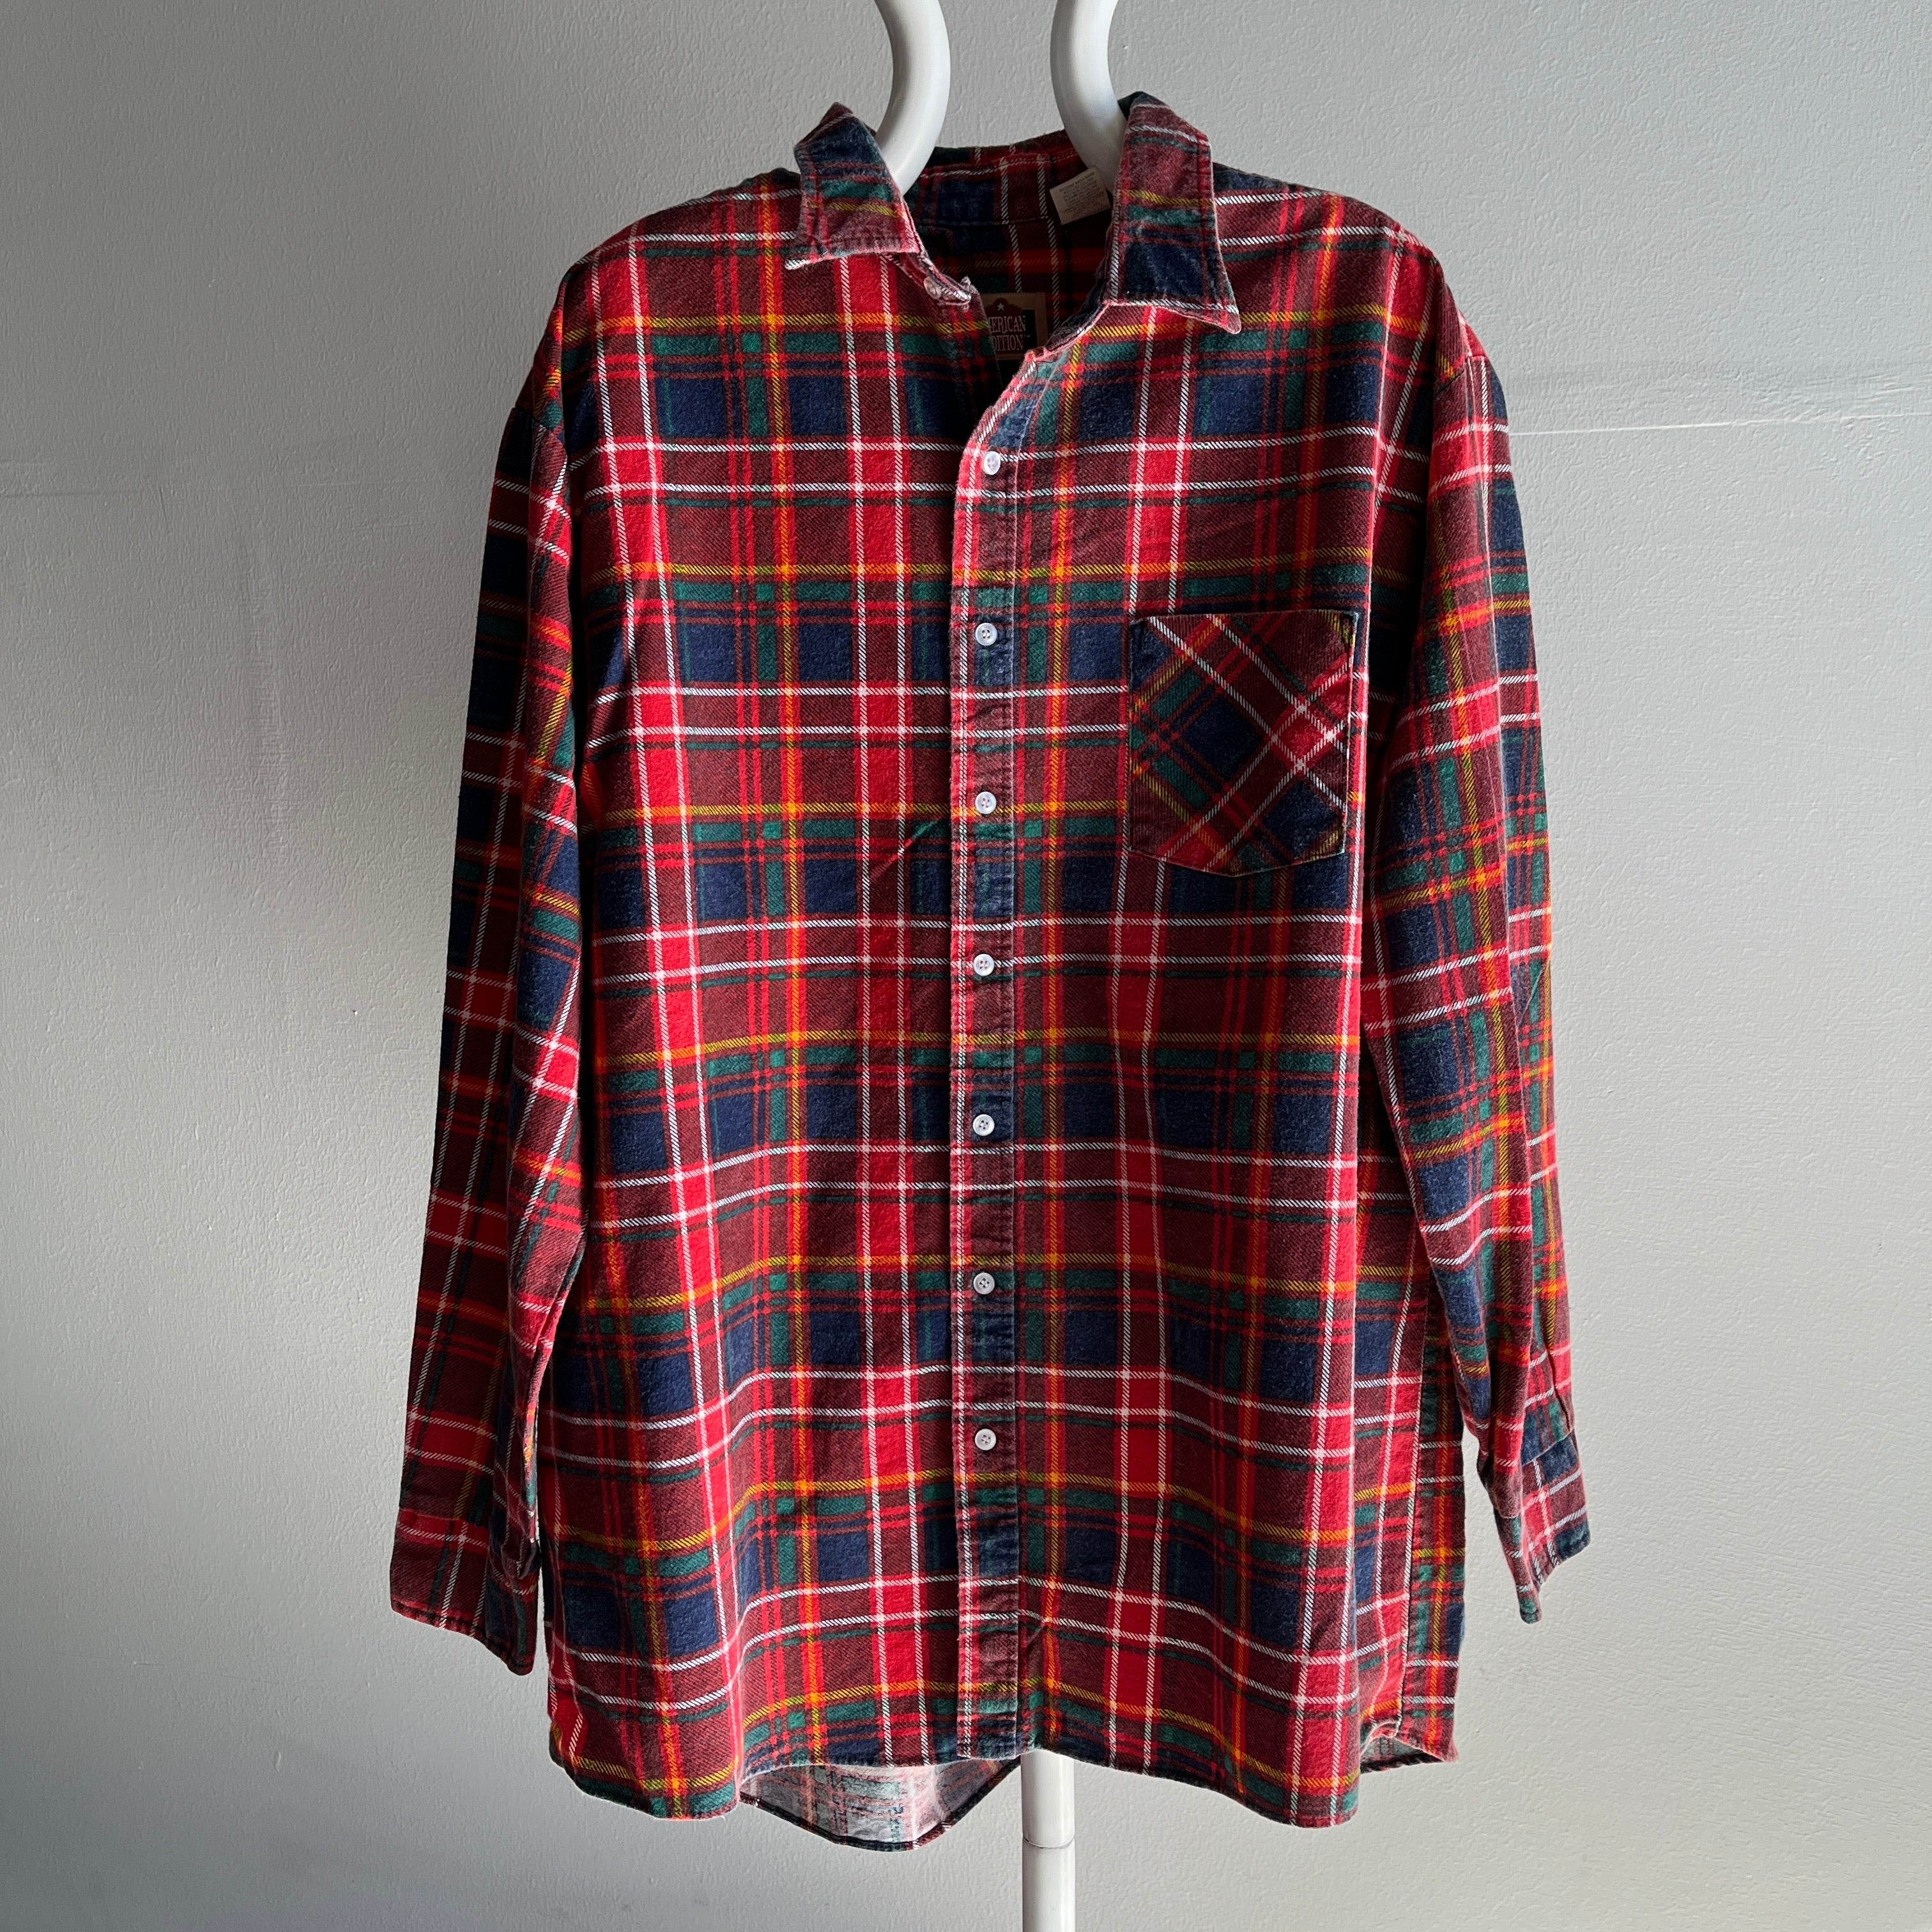 1990s Lightweight Single Sided Cotton Flannel - Oversized